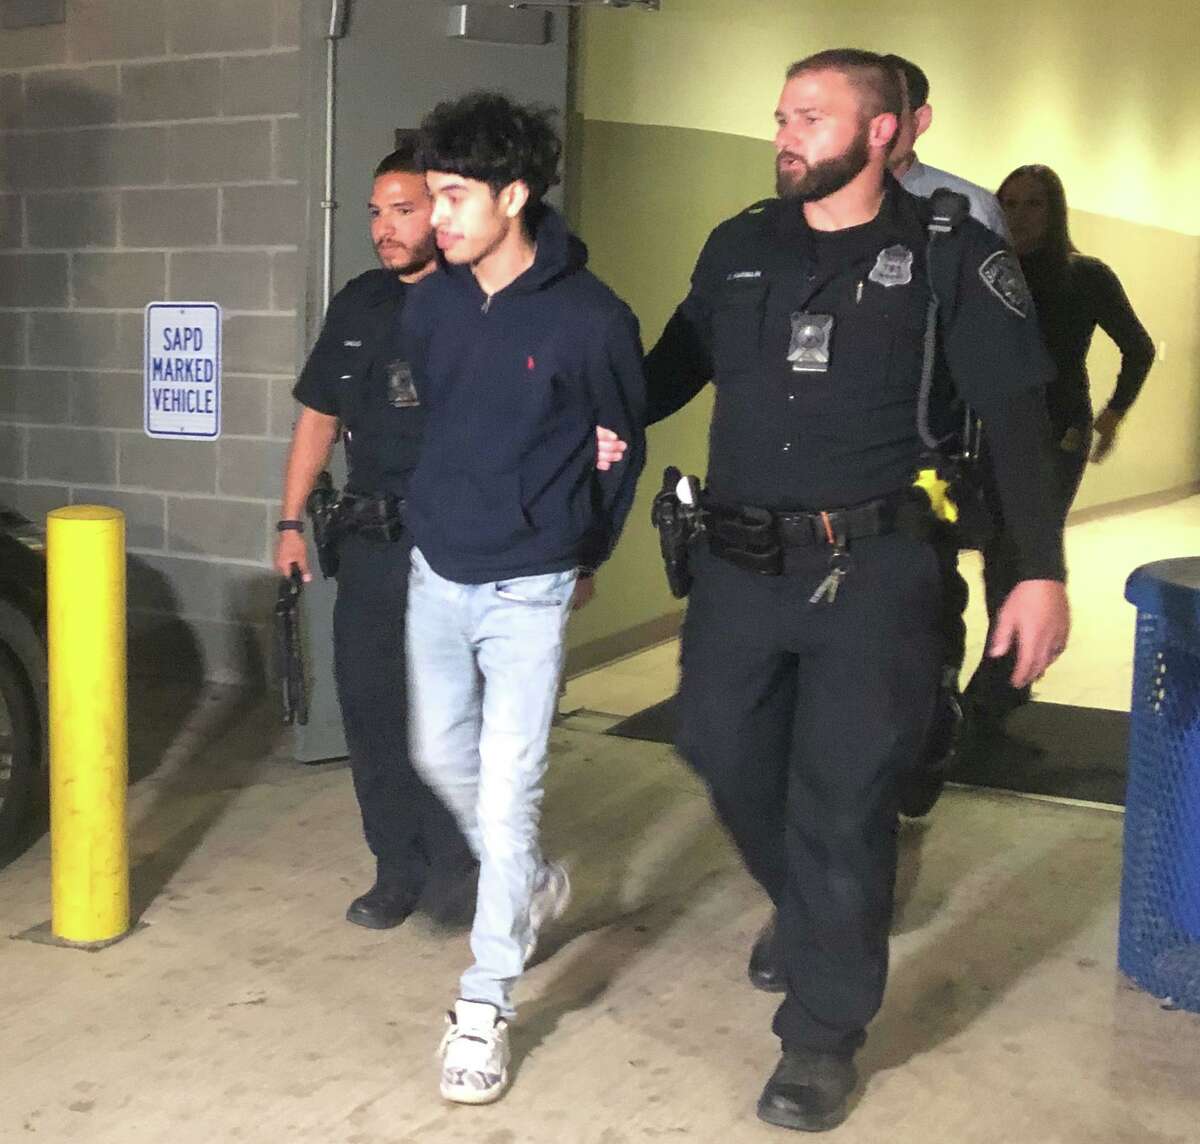 Suspects Jonangel Cervantes, 17, is escorted by San Antonio police at police headquarters downtown Monday night. Cervantes was arrested in connection with the Dec. 18 shooting of four people at South Park Mall.